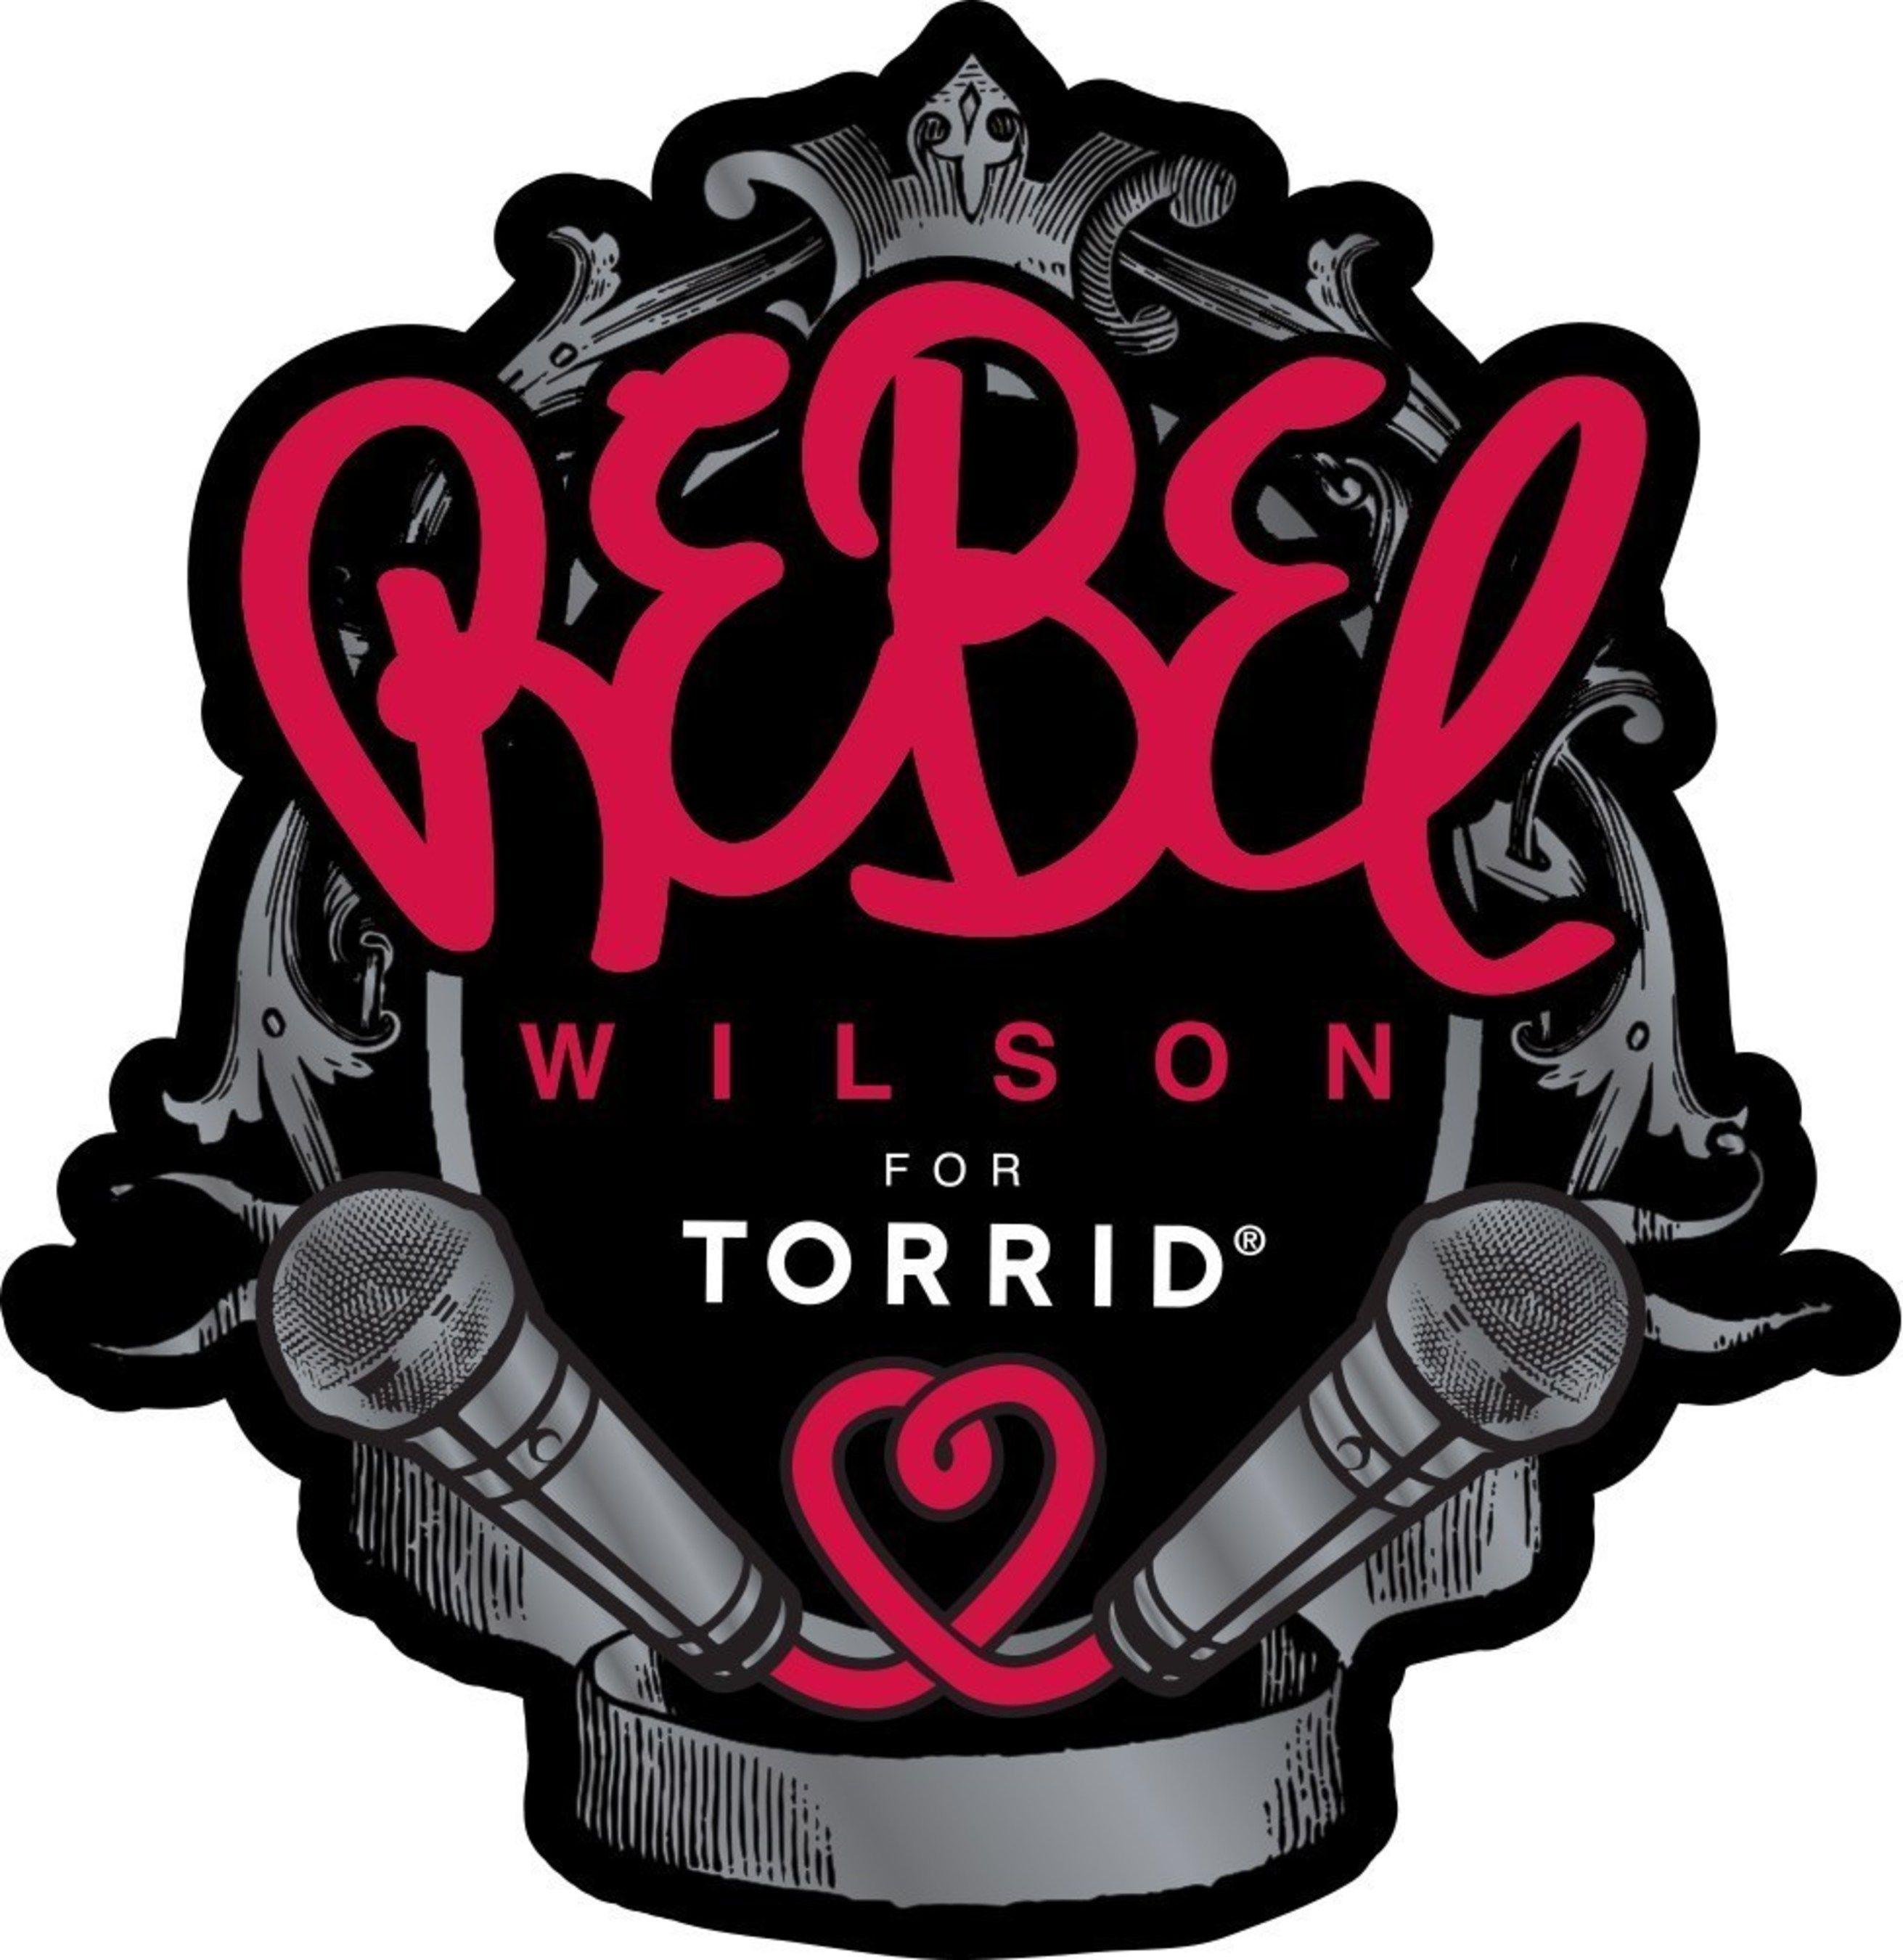 Torrid Logo - TORRID Teams Up With Actress Rebel Wilson For Their First Fashion